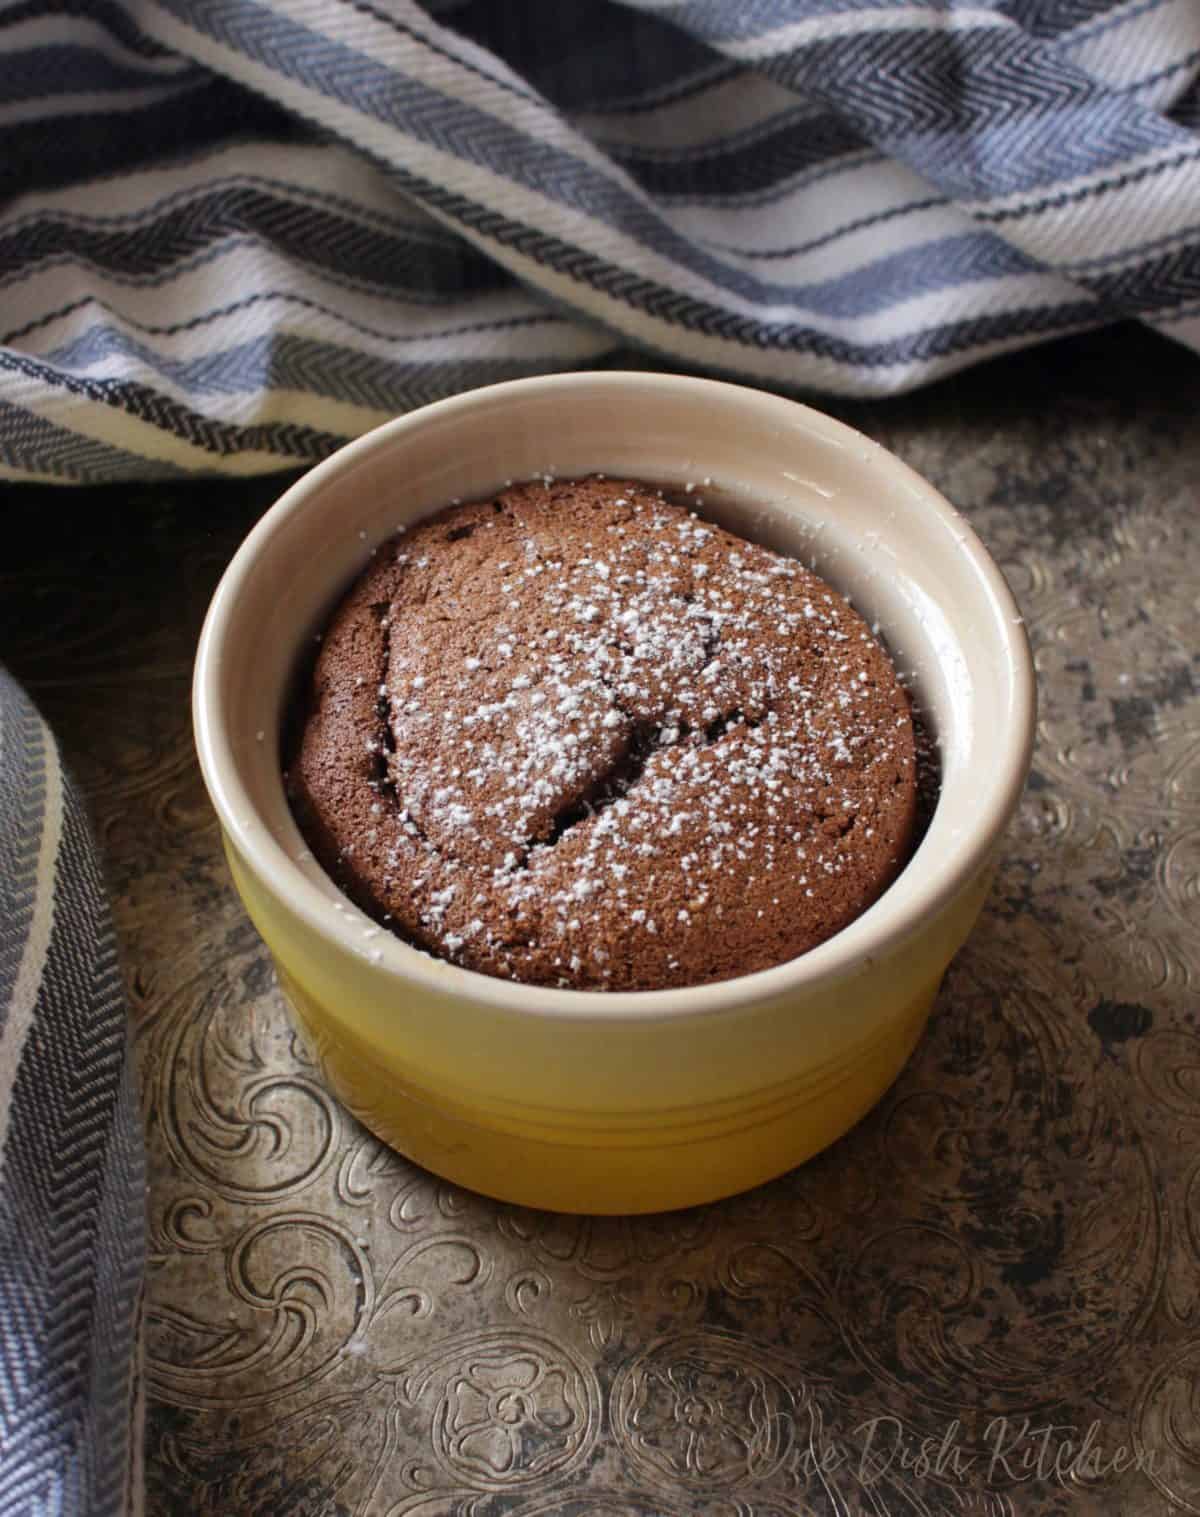 a mini chocolate cake in a yellow baking dish on a silver tray next to a blue and white kitchen towel.